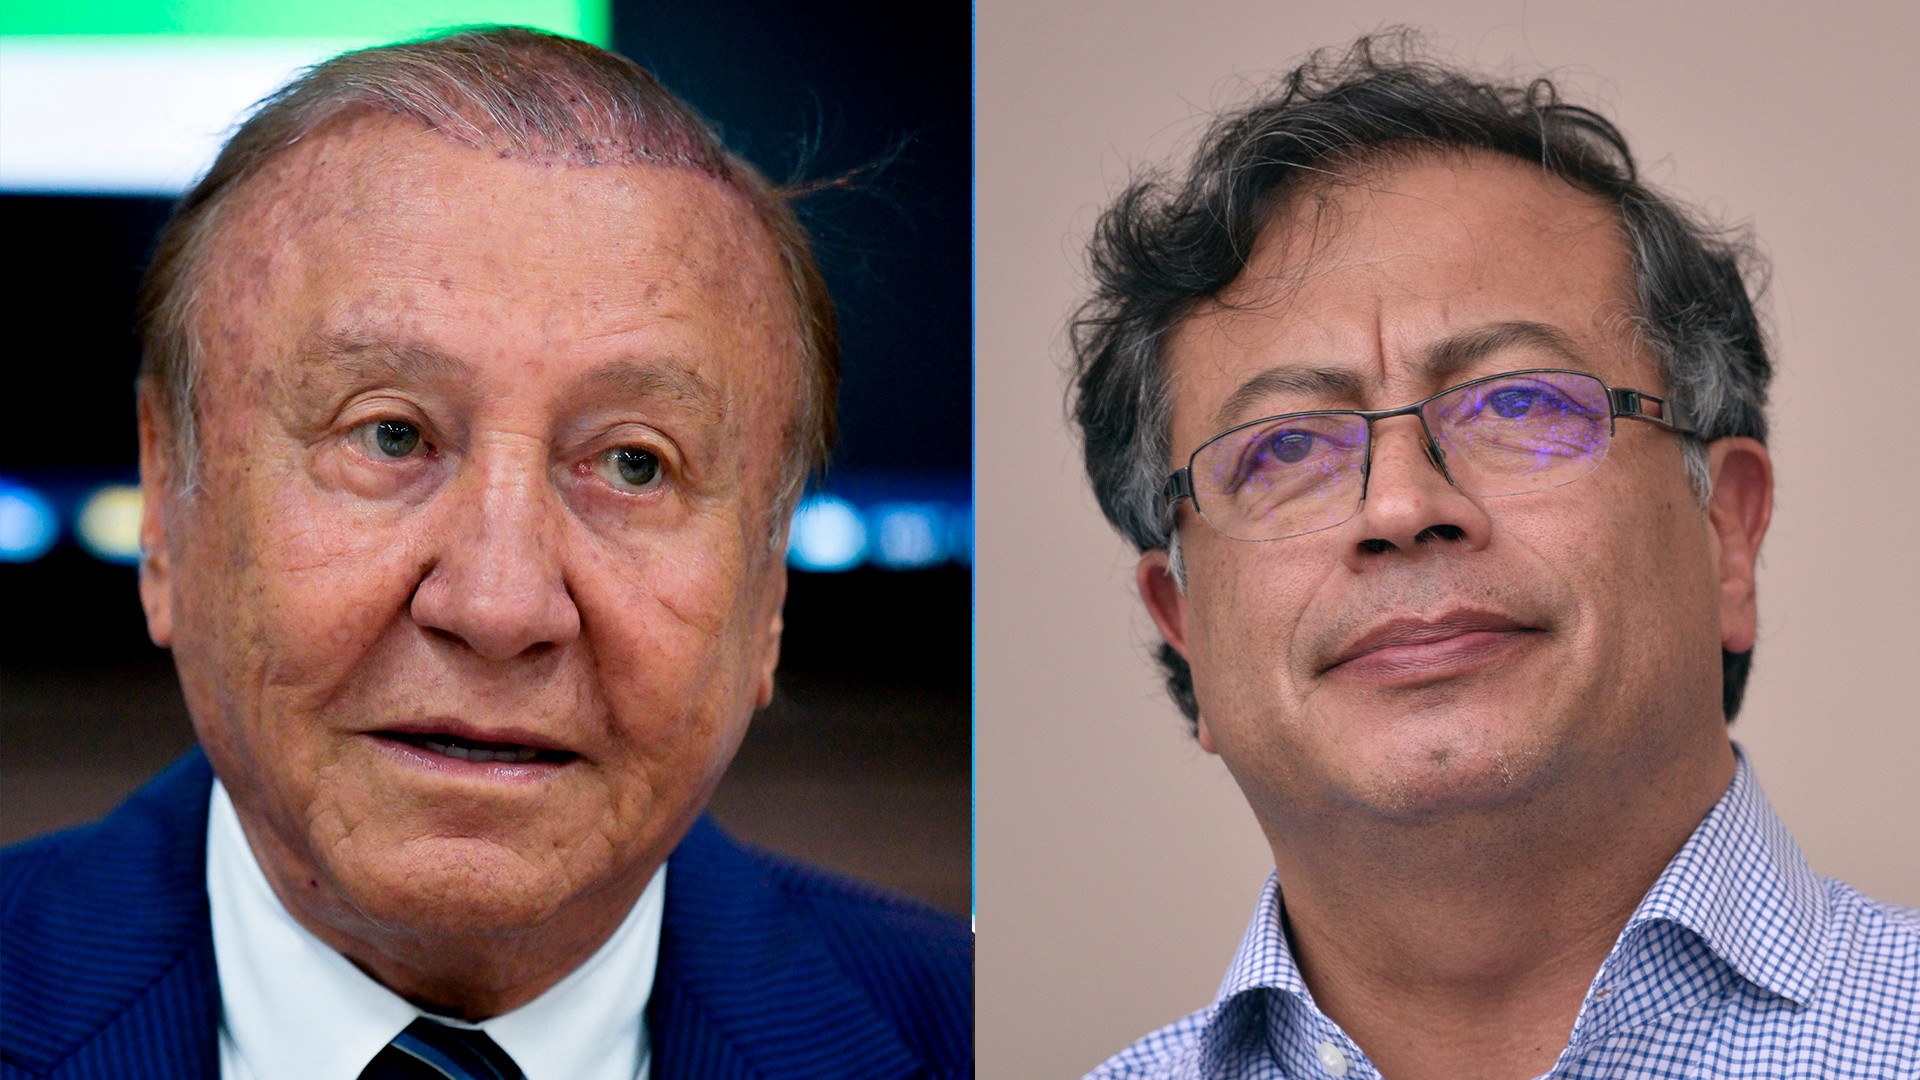 A poll suggests that Rodolfo Hernandez and Gustavo Pedro will join forces in the Colombian election.